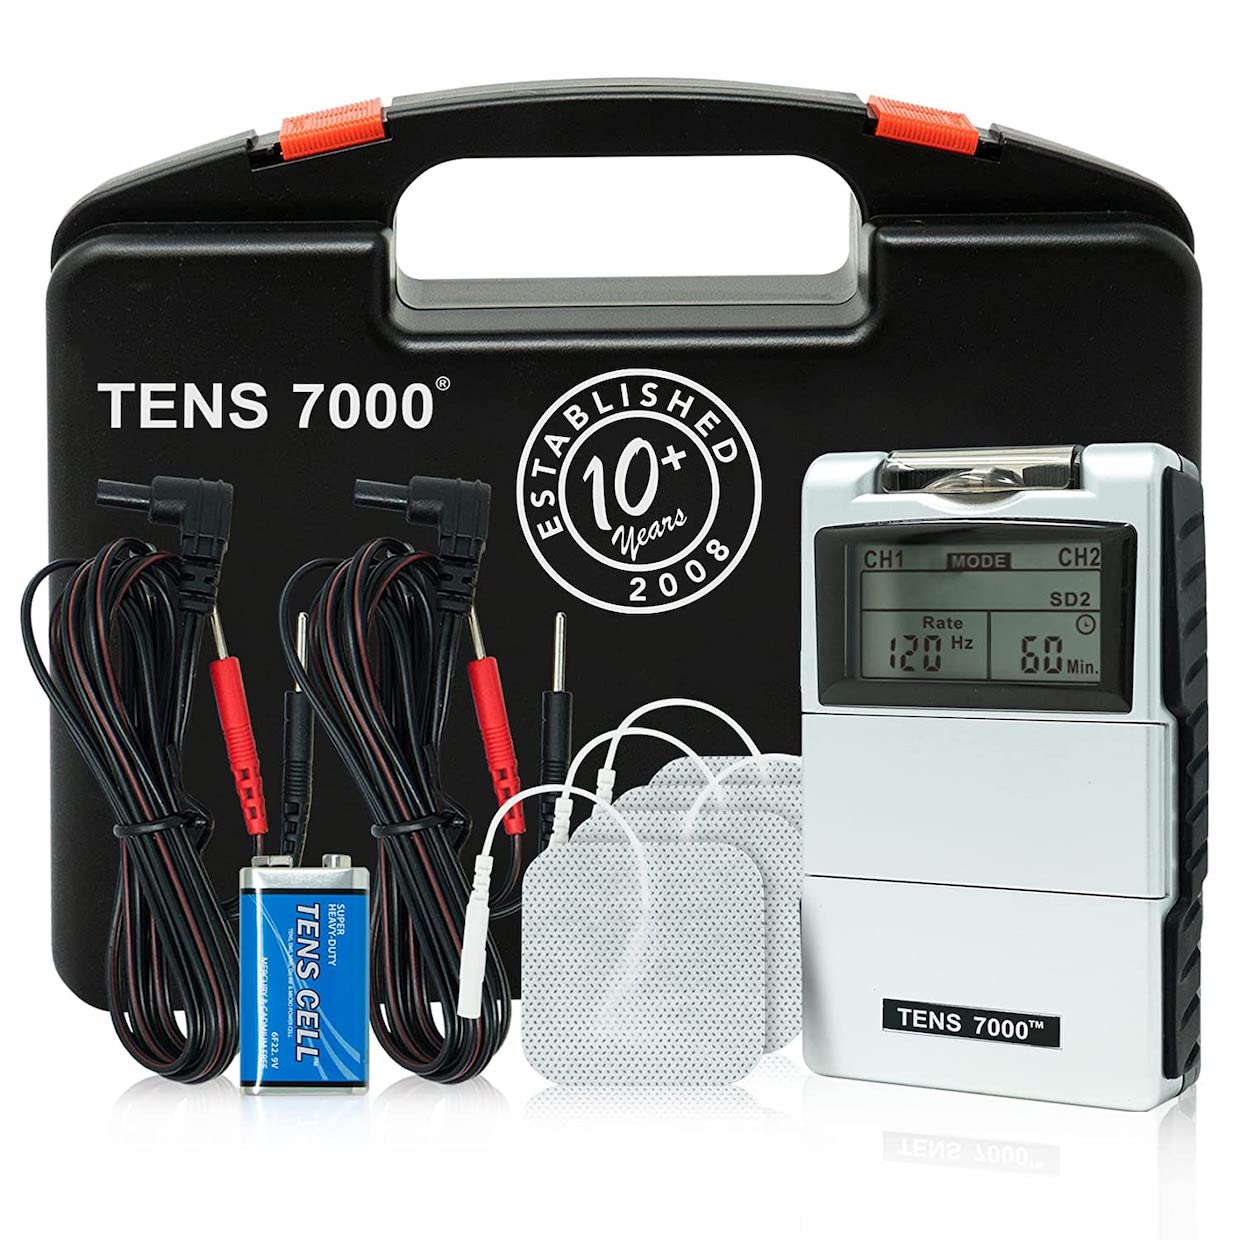 Portable Digital TENS Unit with Starter Kit and Case - TENS 7000